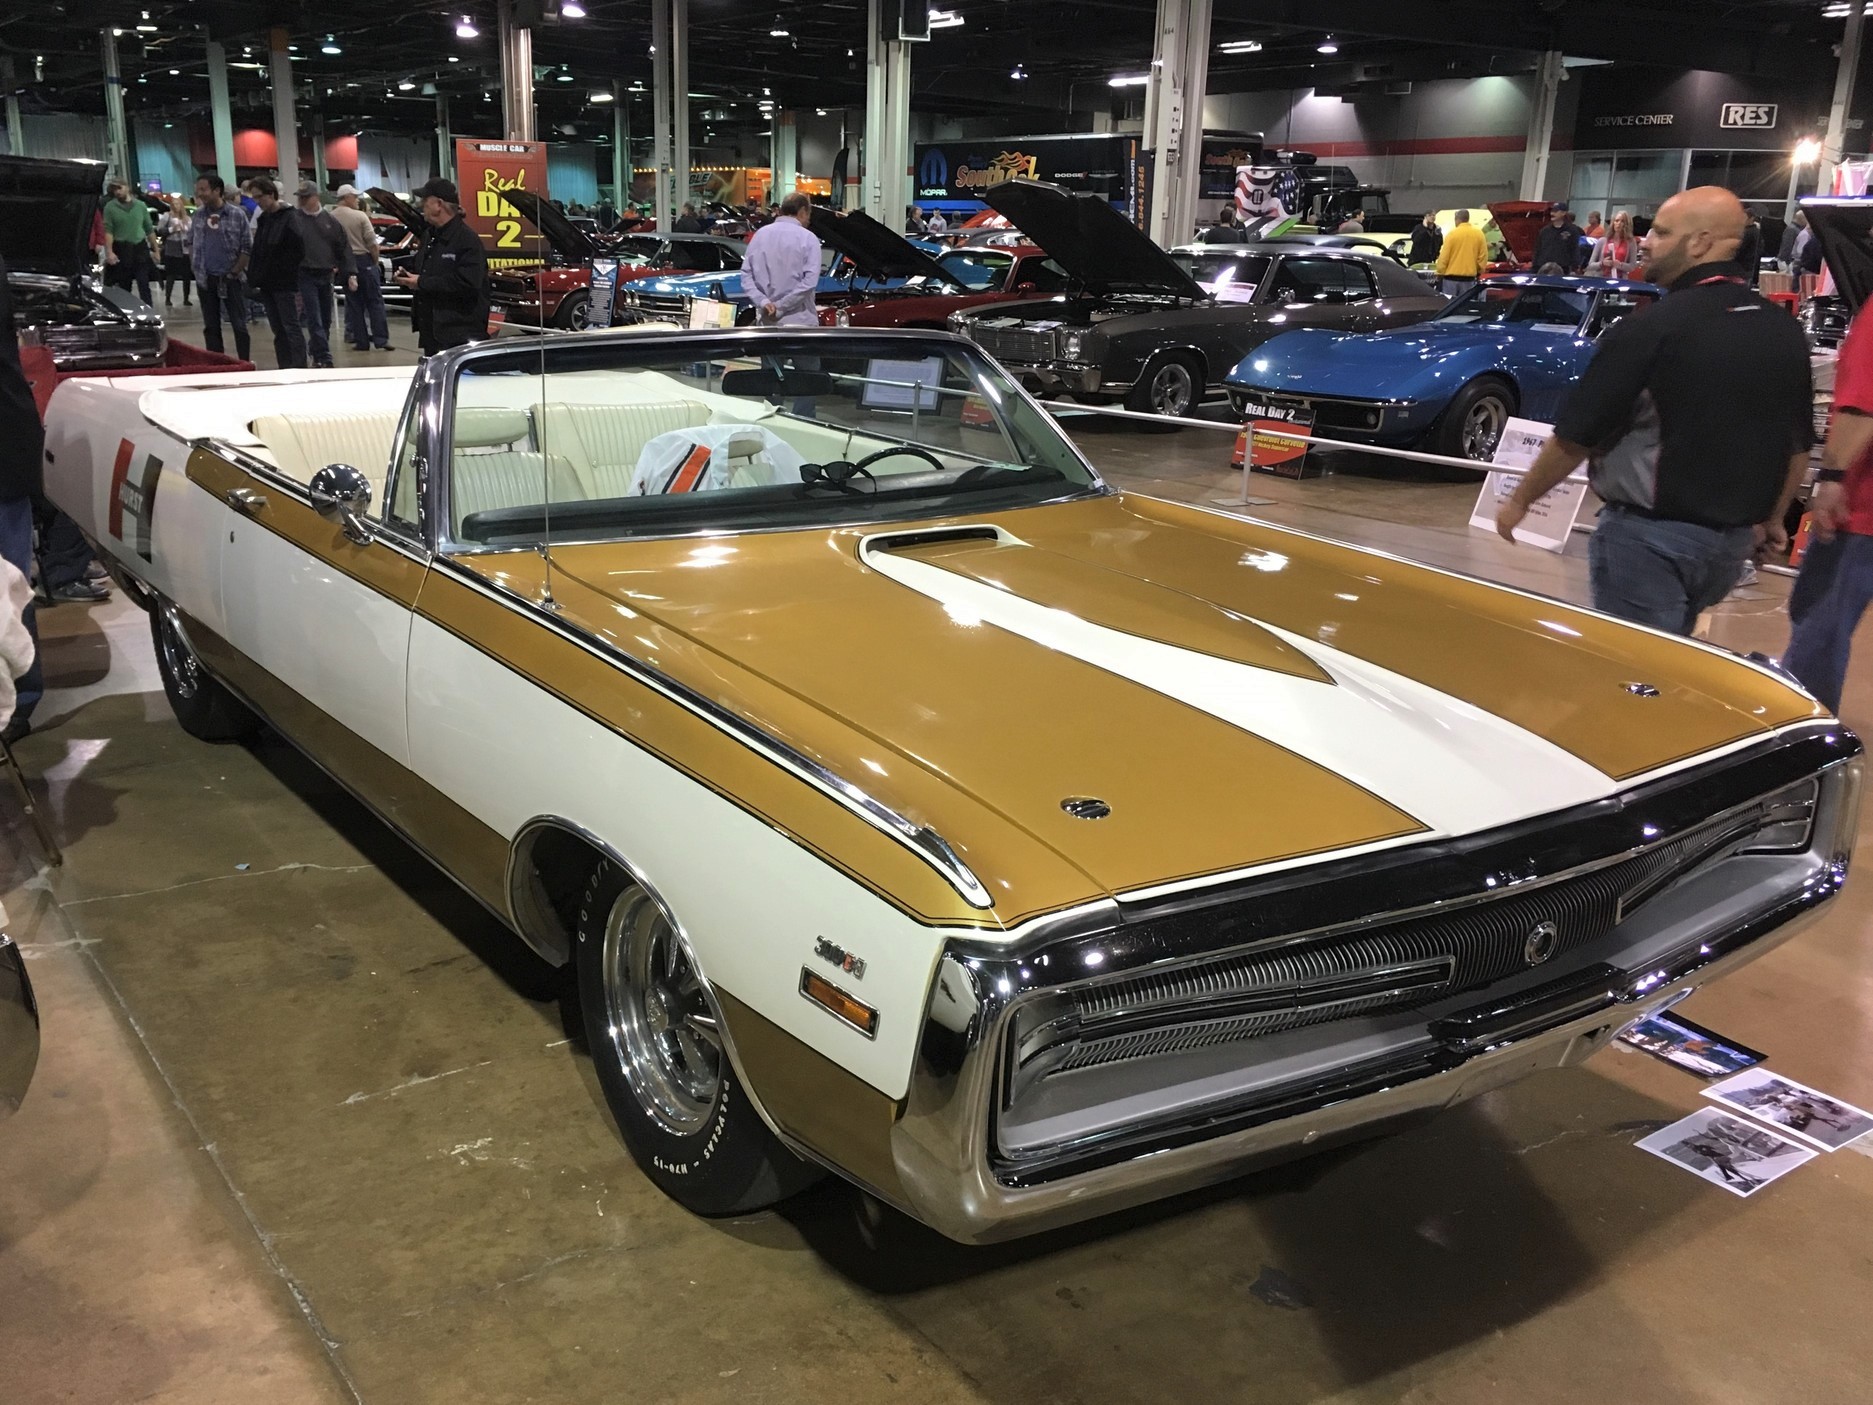 , Muscle cars, Corvettes take Chicago by storm, ClassicCars.com Journal